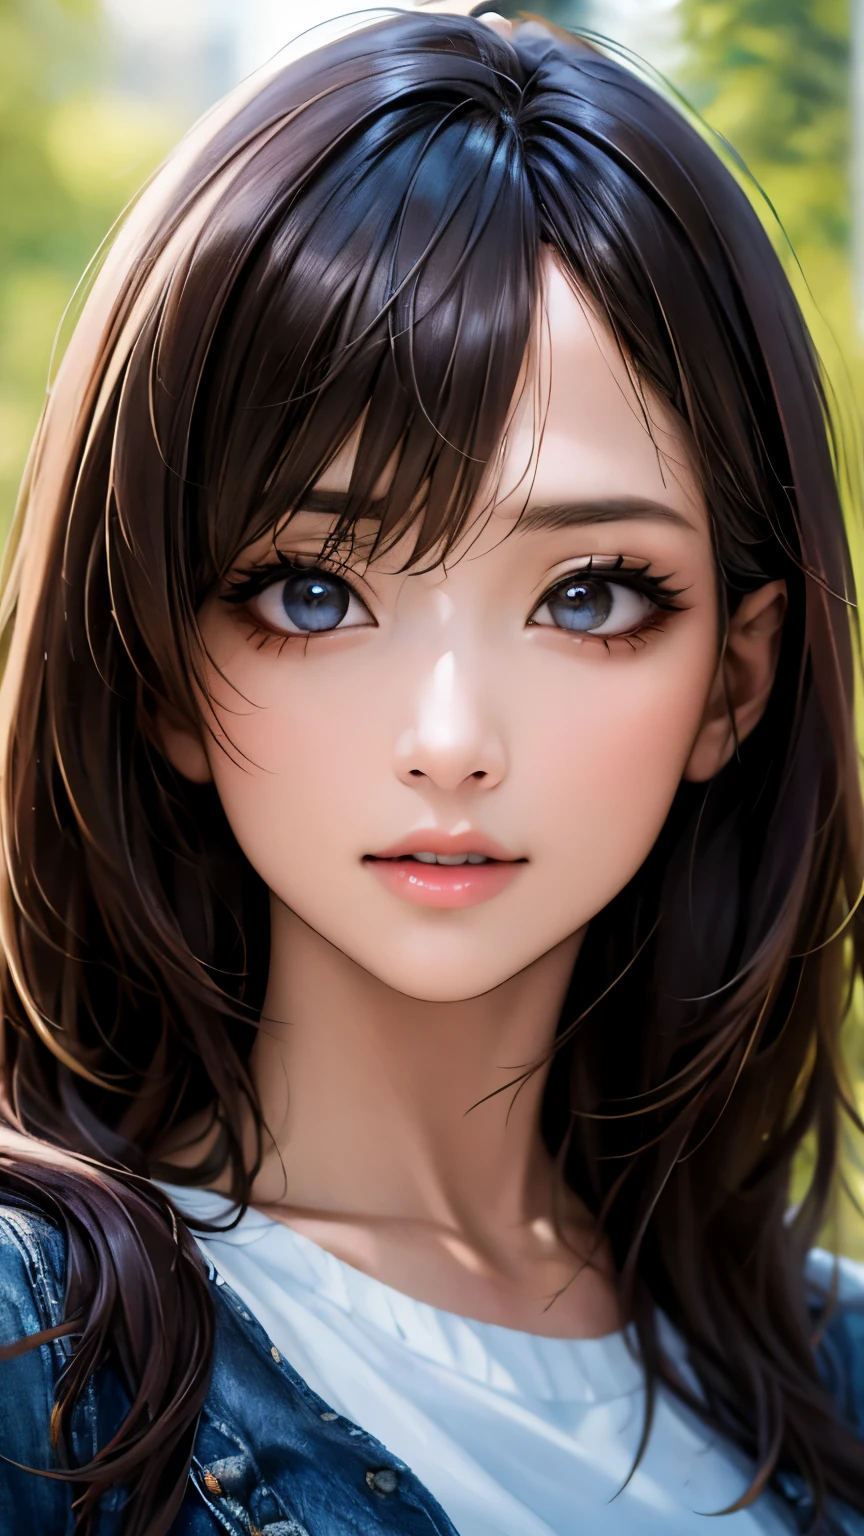 (hig彼st quality、8k、32k、masterpiece)、(Realistic)、(Realistic:1.2)、(High resolution)、Very detailed、Very beautiful face and eyes、1 girl、Delicate body、(hig彼st quality、Attention to detail、Rich skin detail)、(hig彼st quality、8k、Oil paint:1.2)、Very detailed、(Realistic、Realistic:1.37)、Bright colors、Full Body Shot, (Casual Fashion)